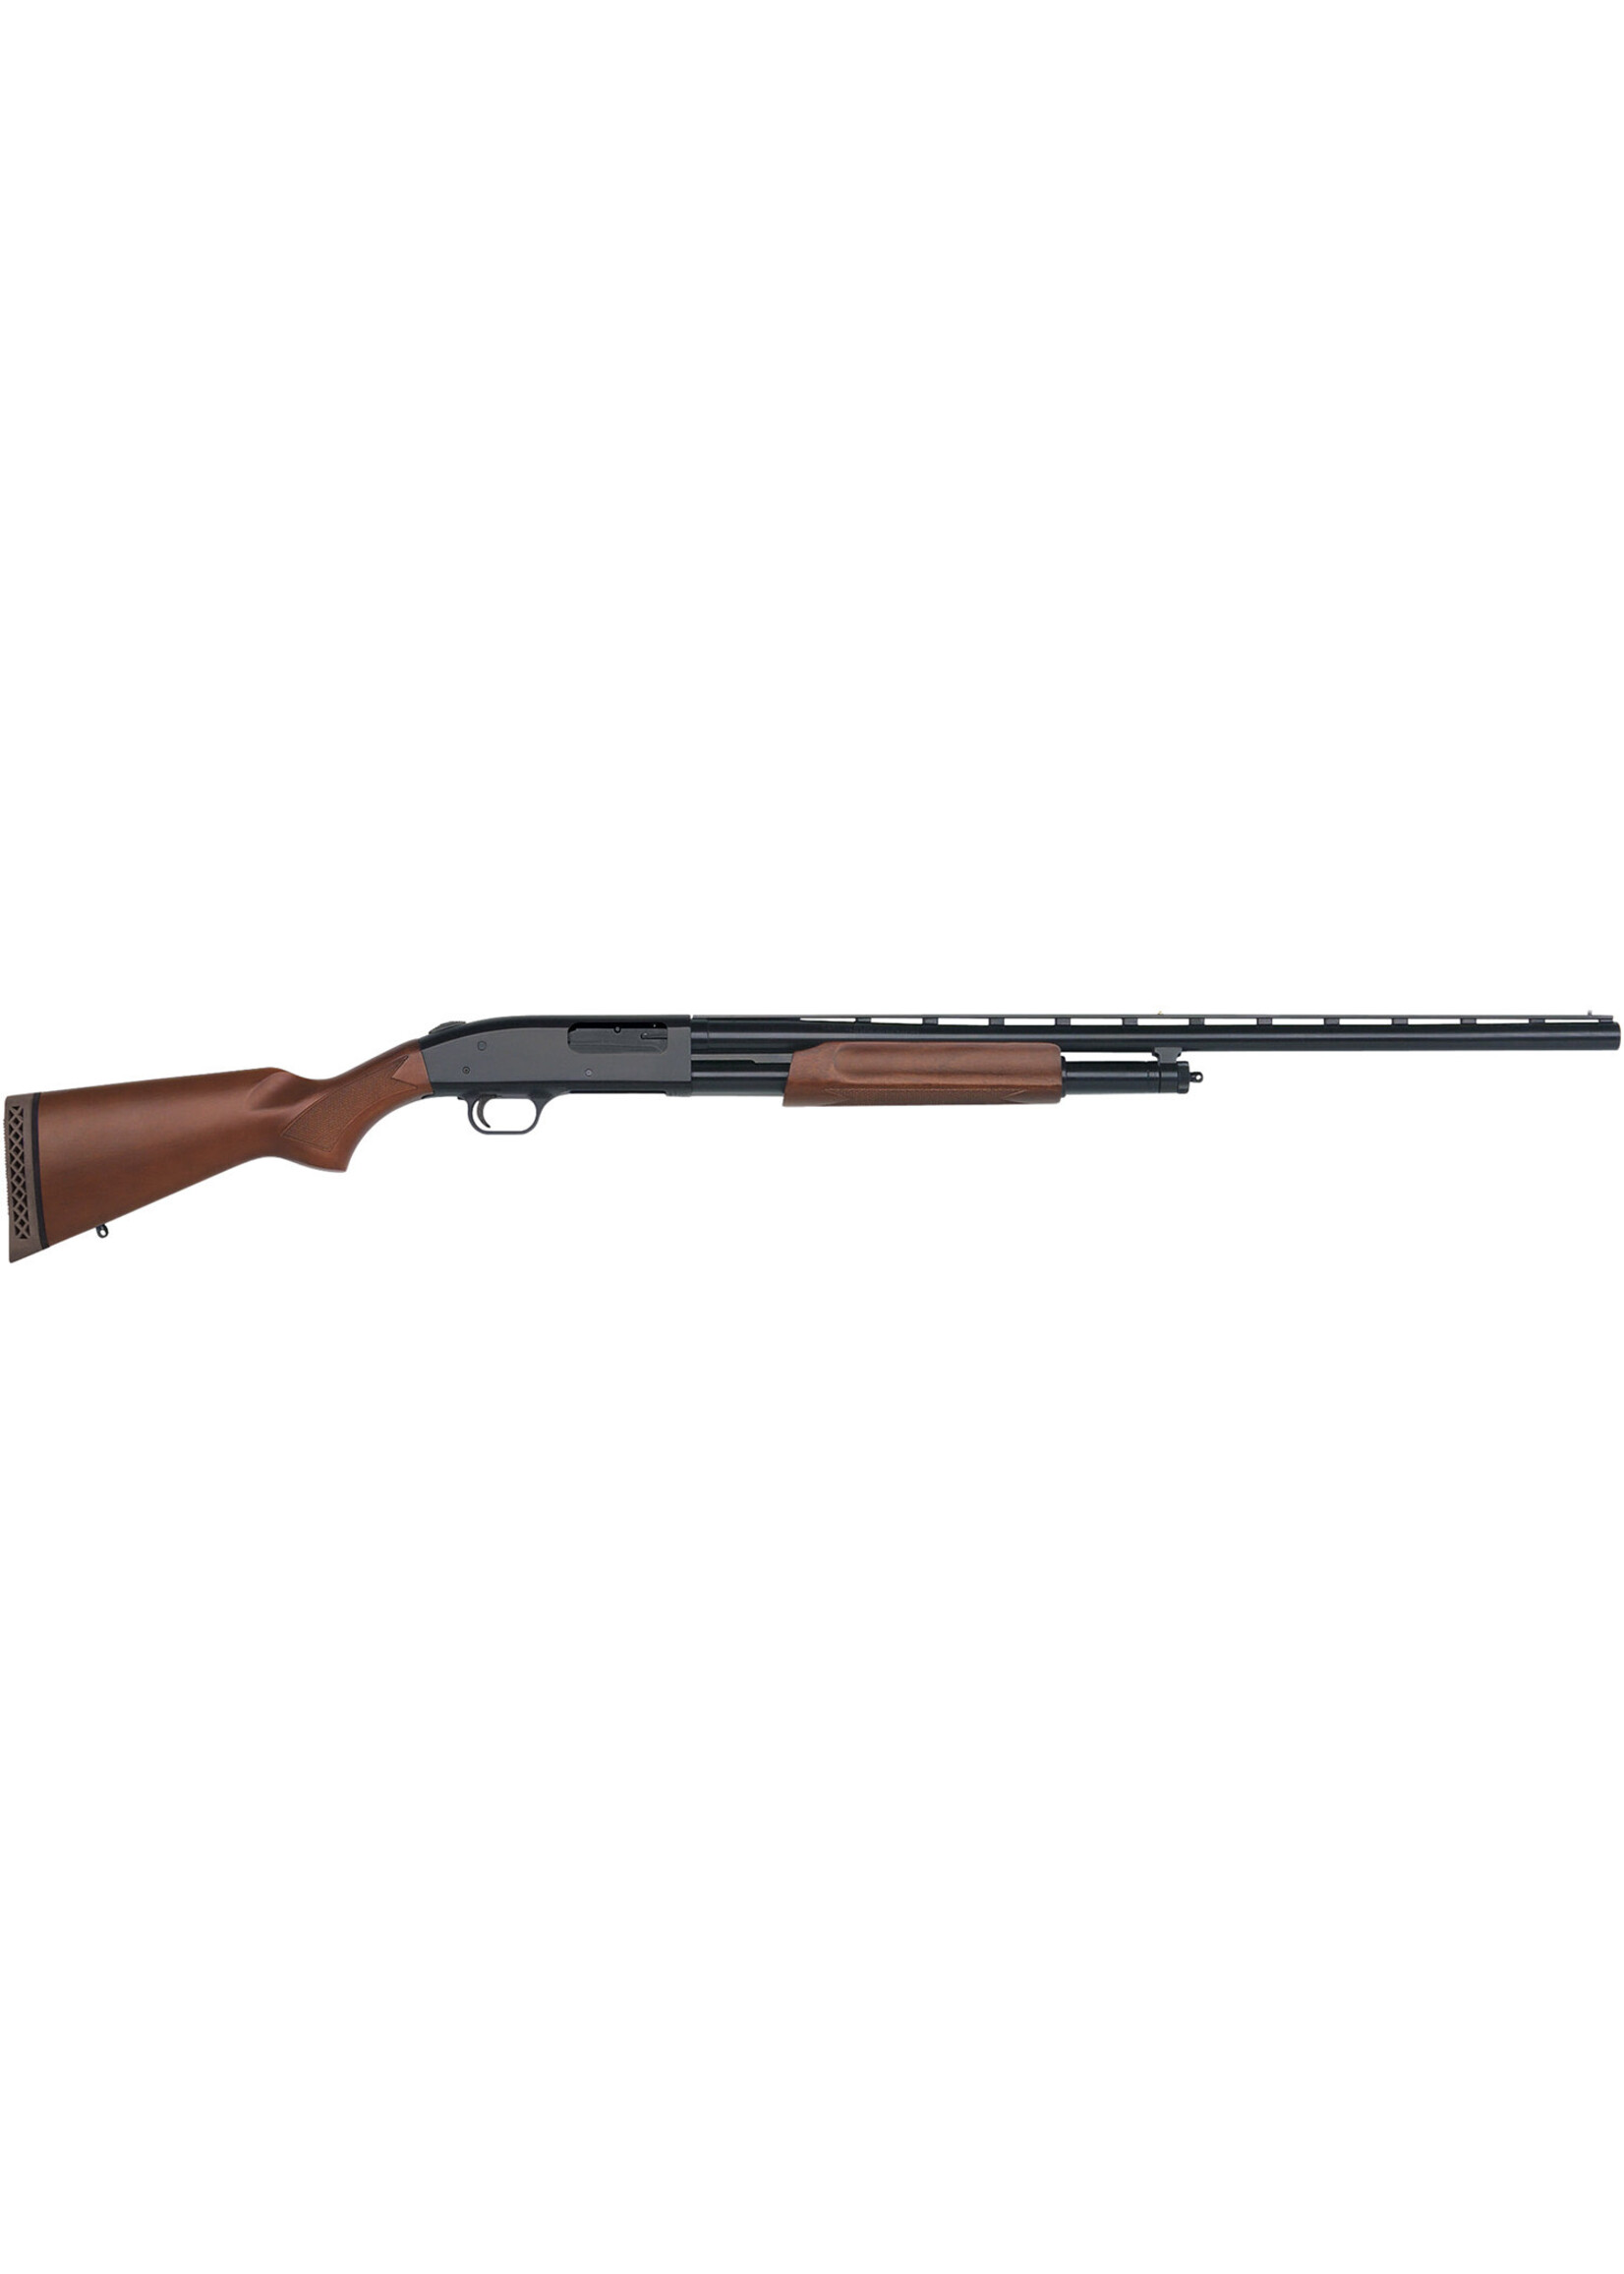 Mossberg Mossberg 50120 500 All Purpose Field 12 Gauge 3" 5+1 28" Vent Rib Barrel, Blued Metal Finish, Dual Extractors, Wood Stock, Ambidextrous Safety, Includes Accu-Set Chokes